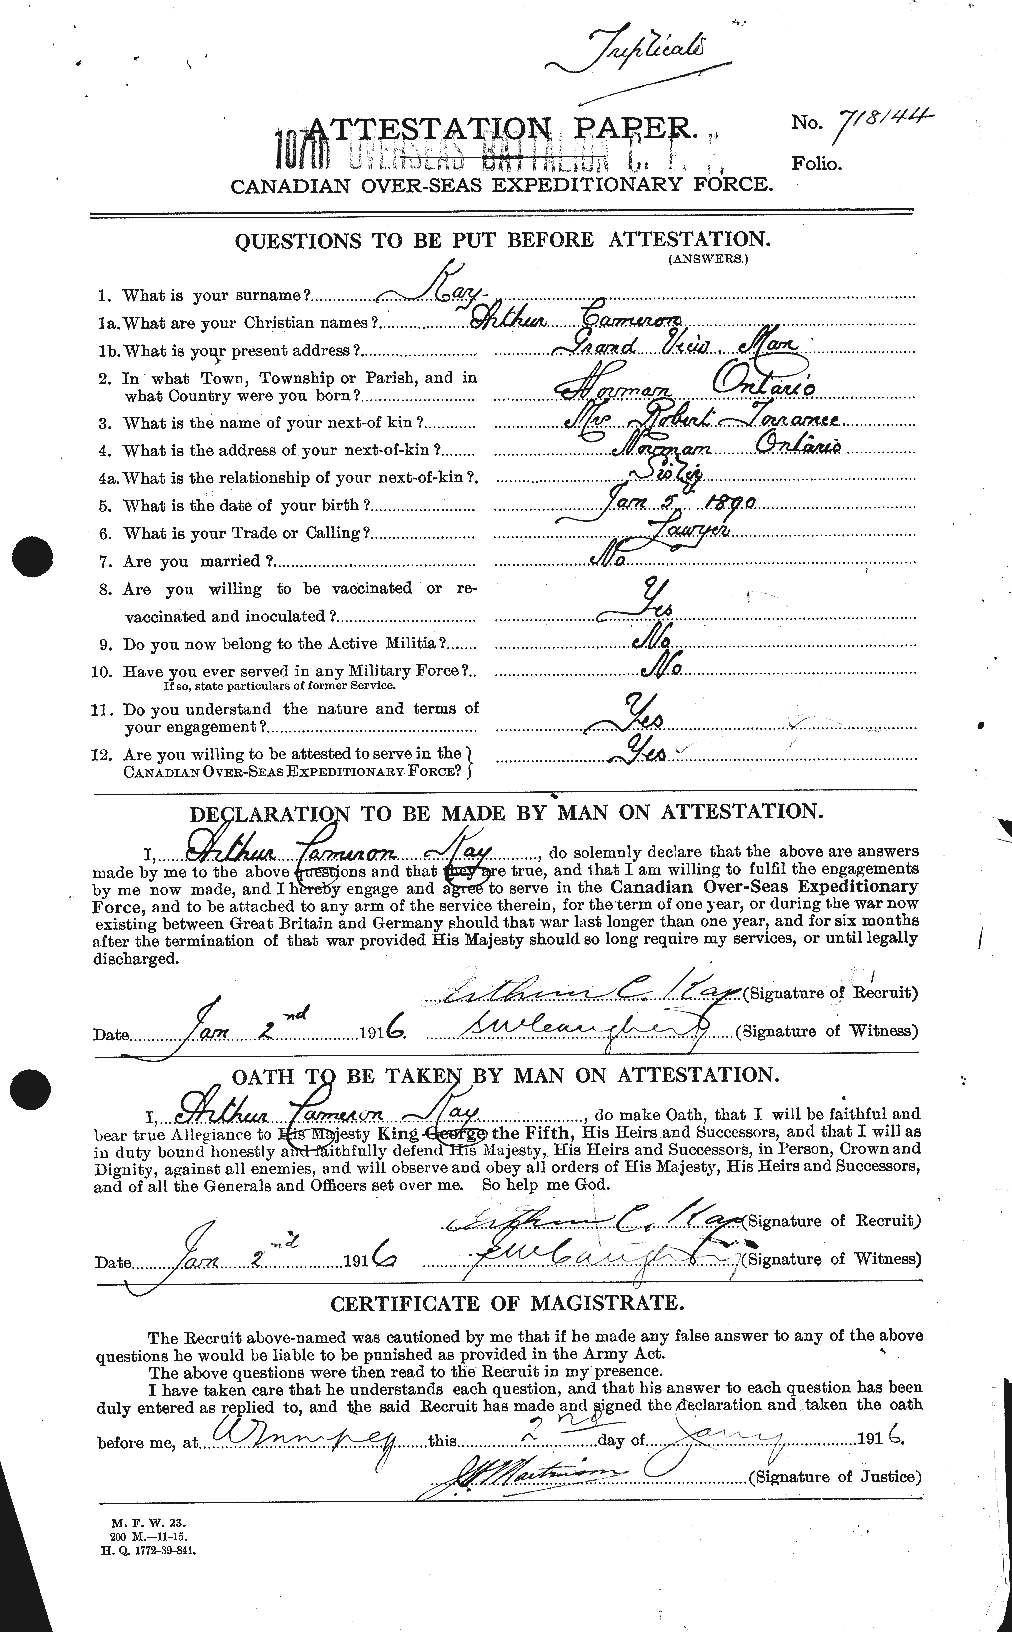 Personnel Records of the First World War - CEF 425890a